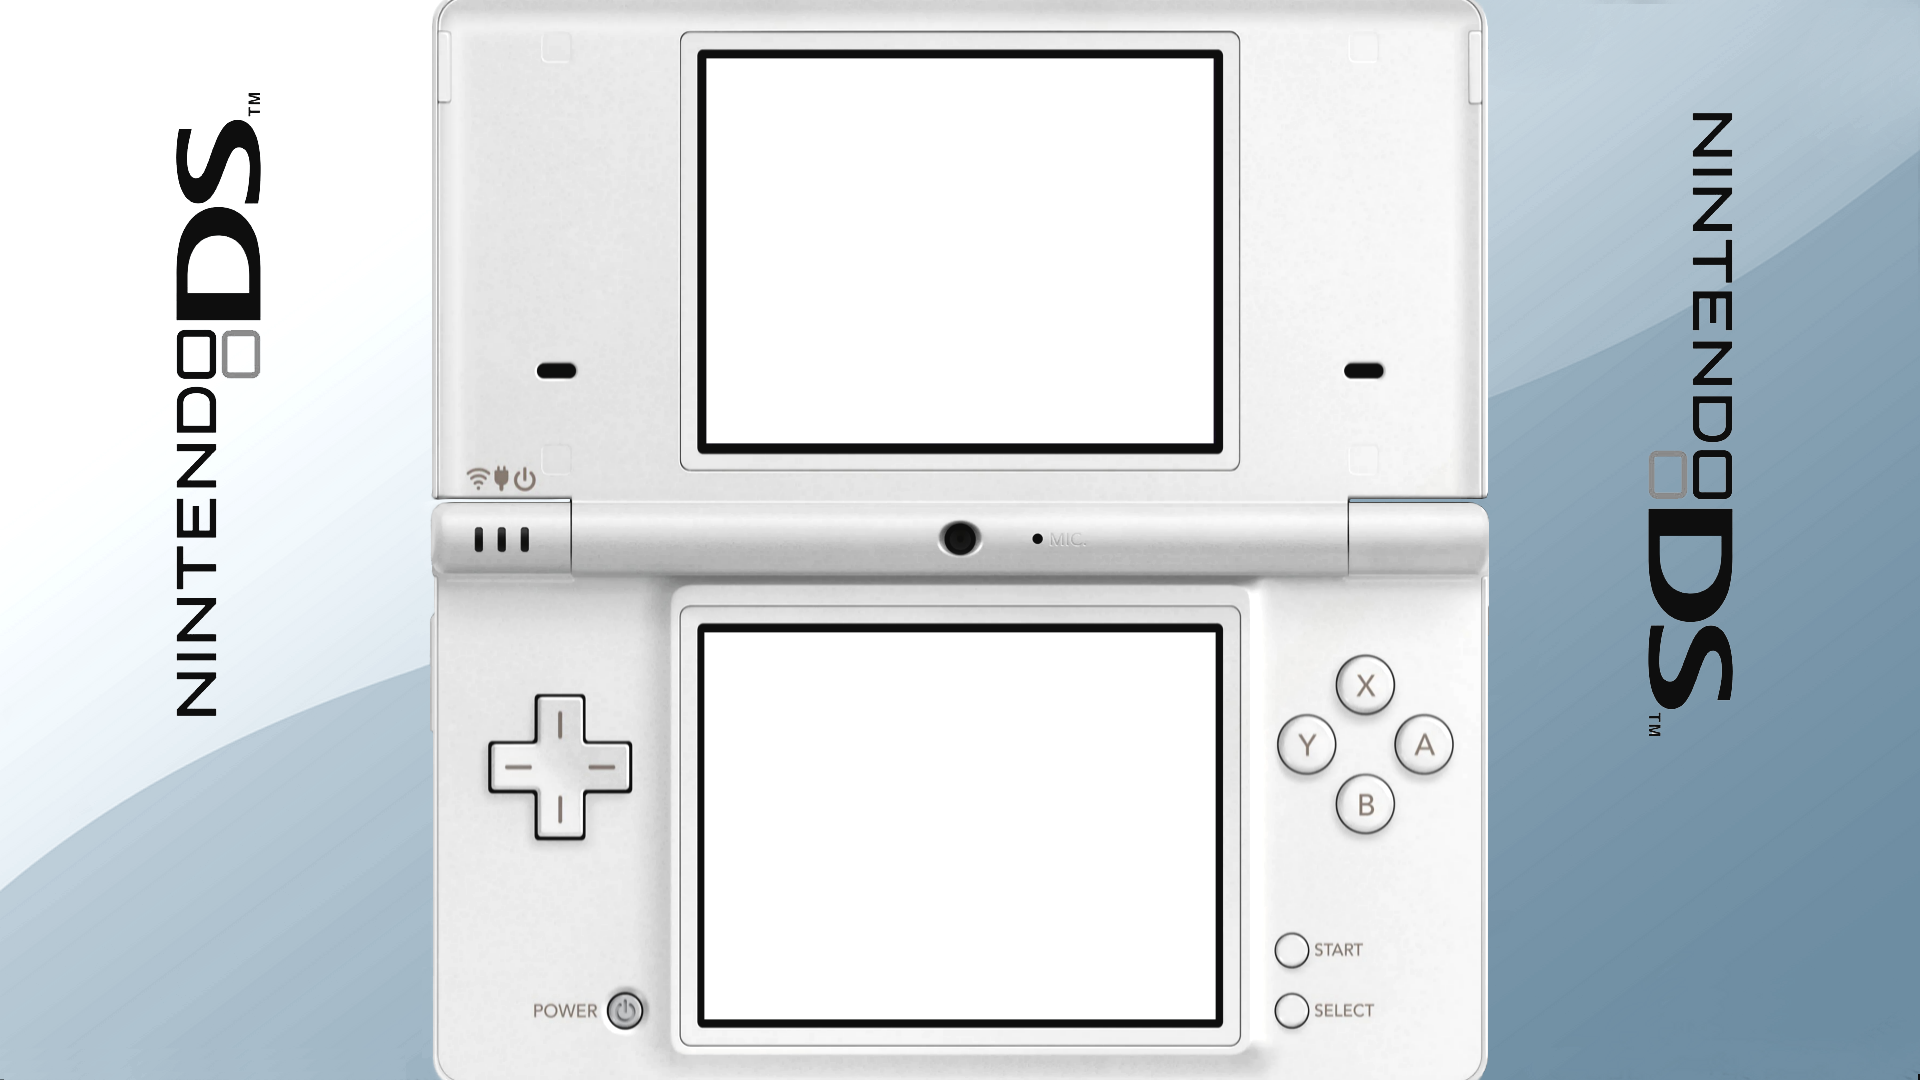 More information about "Retroarch - DS with Overlay & Border"